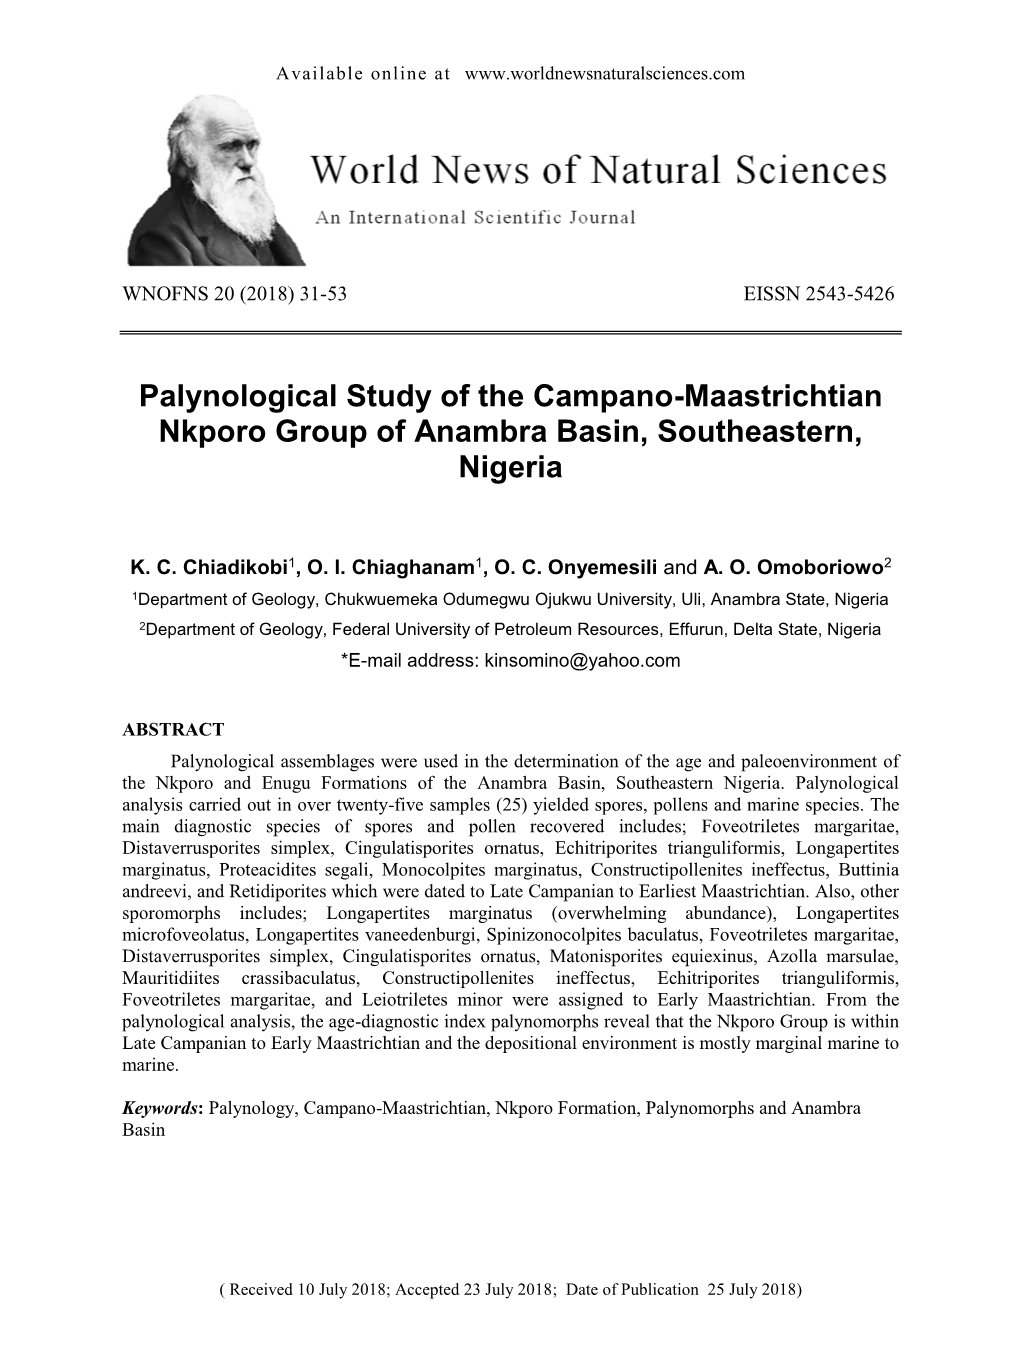 Palynological Study of the Campano-Maastrichtian Nkporo Group of Anambra Basin, Southeastern, Nigeria